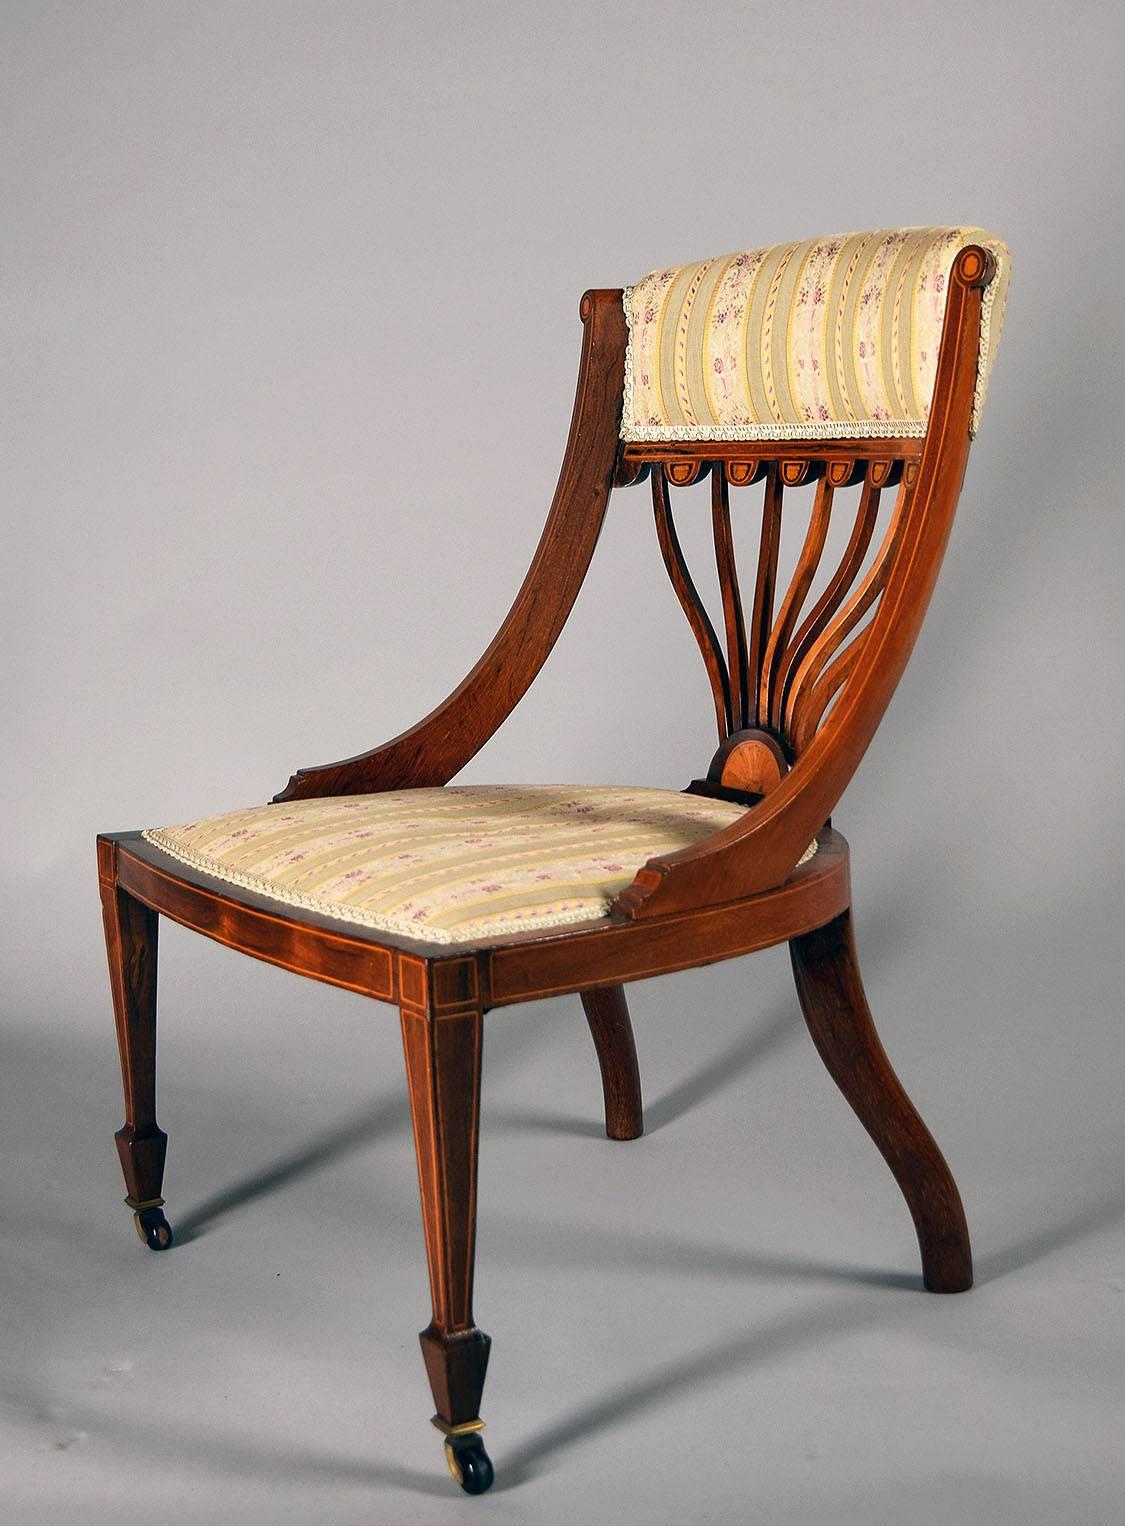 With upholstered crestrail centering line inlaid scroll uprights over a tablet back with inlaid demilune pendant medallions, the upholstered seat on squared tapering legs ending in spade feet and casters.

Provenance:  Roundwood Manor, Hunting